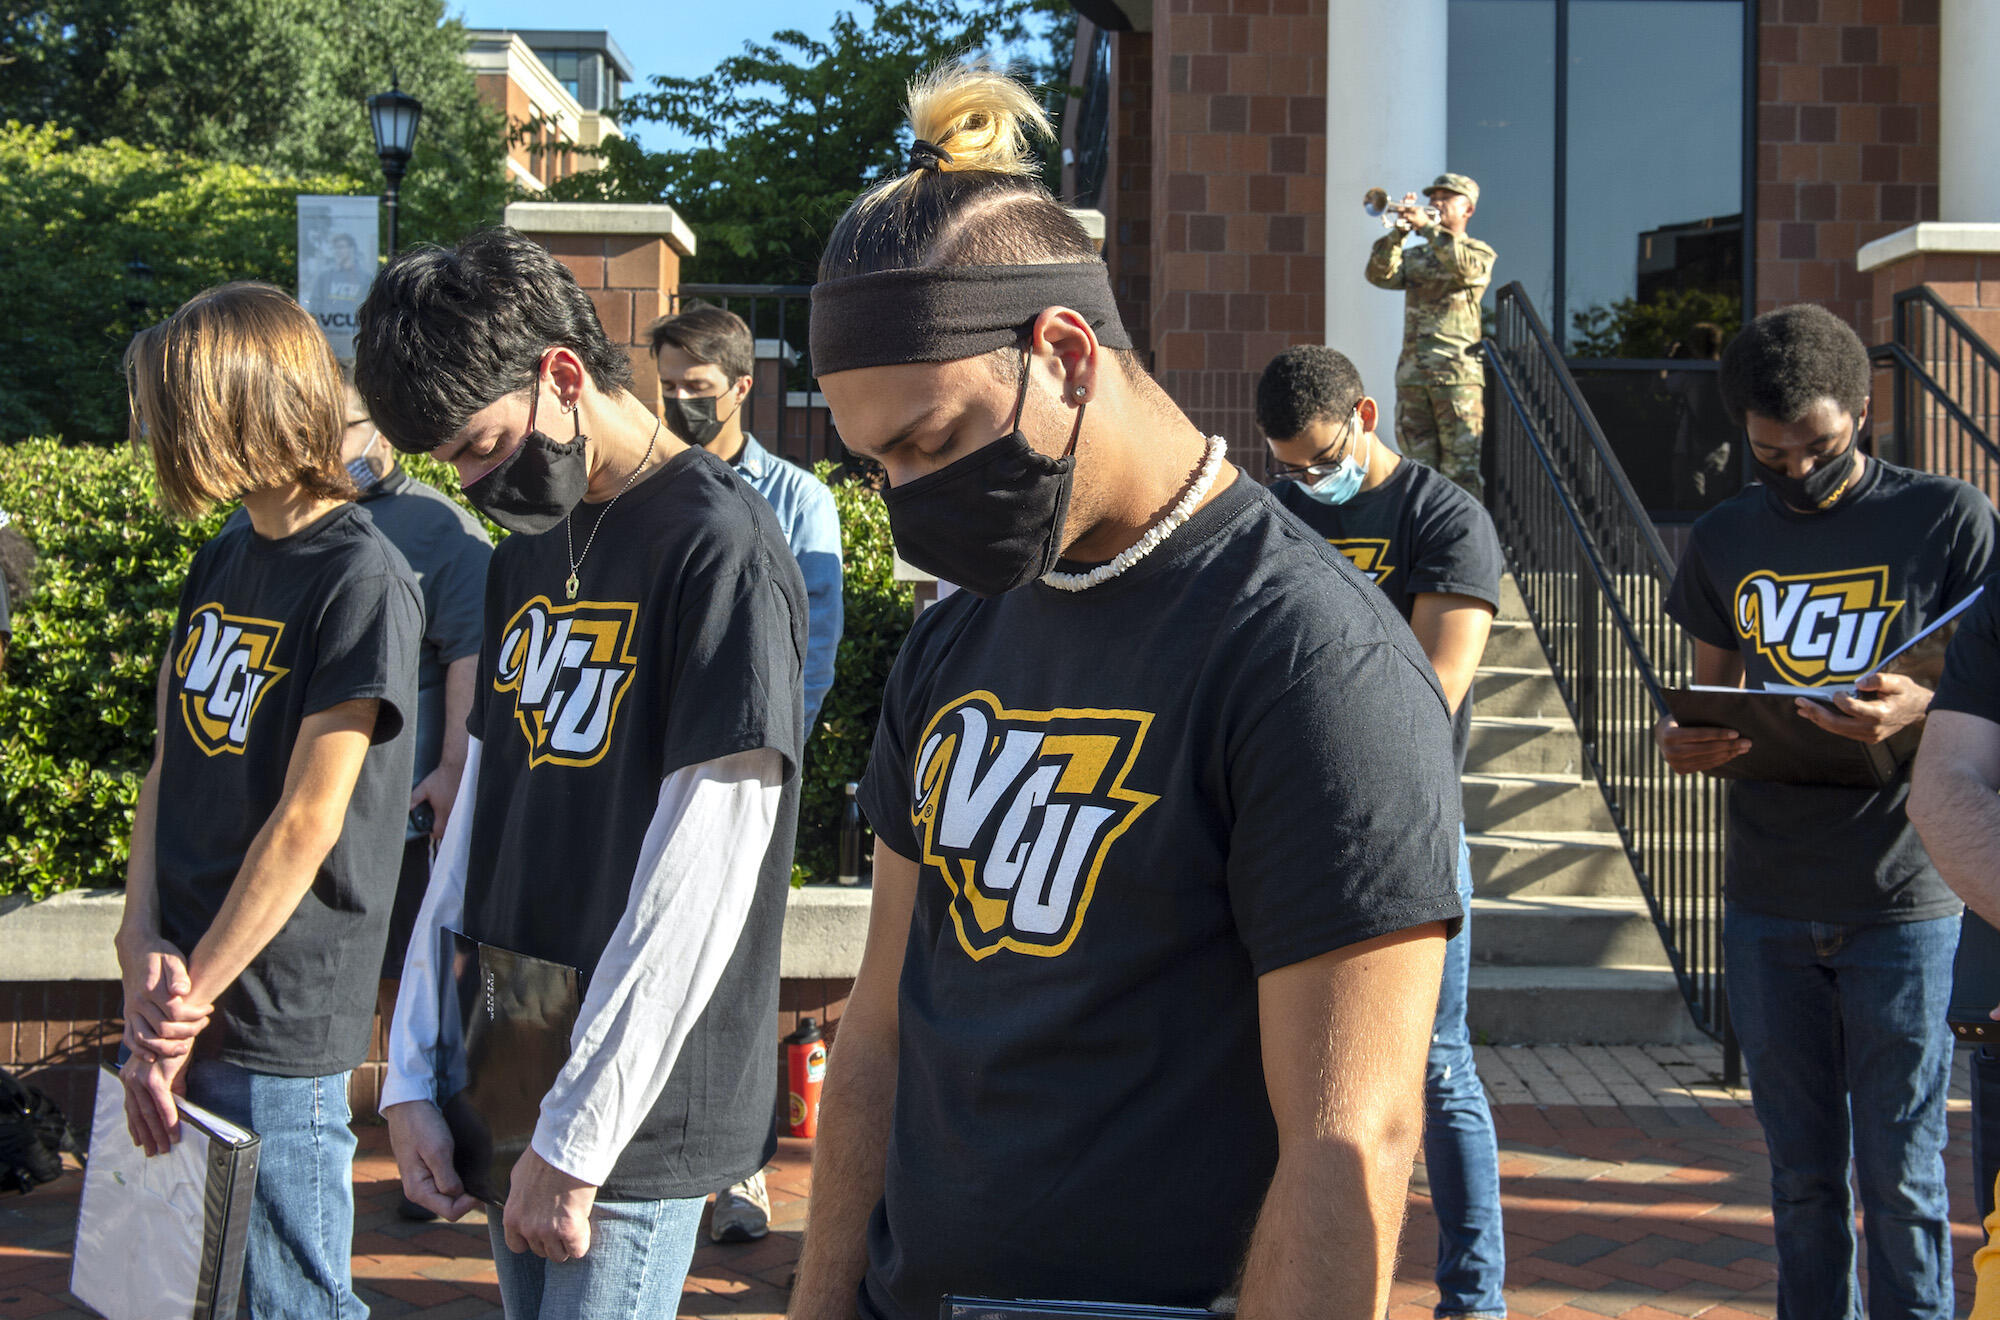 Students participate in a moment of silence at a 9/11 anniversary event.